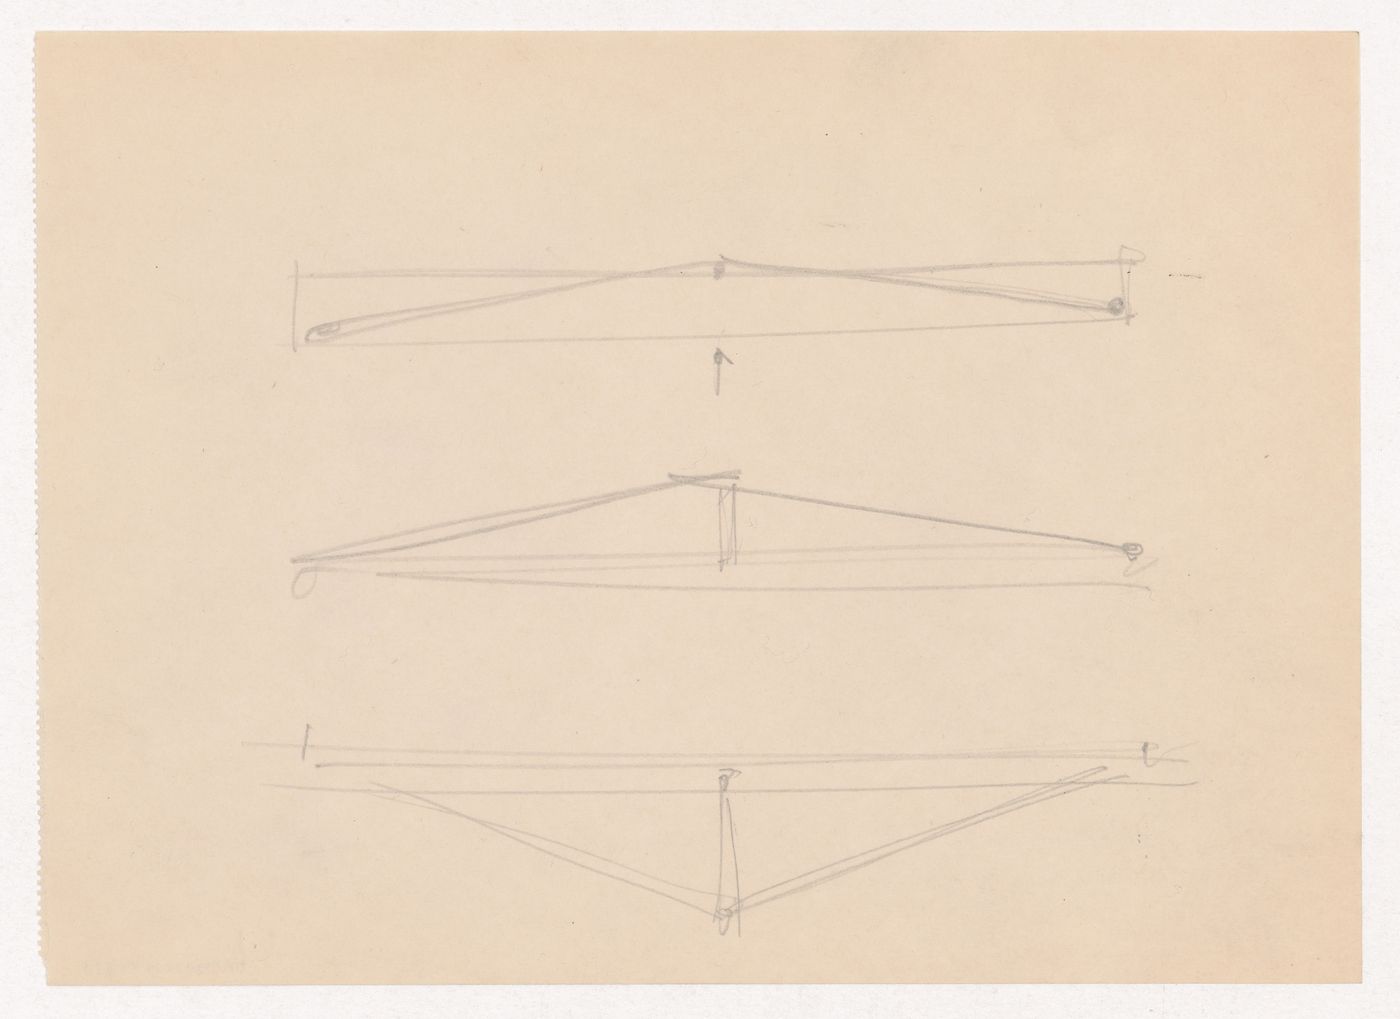 Sketch elevations for a roof truss for Museum for a Small City